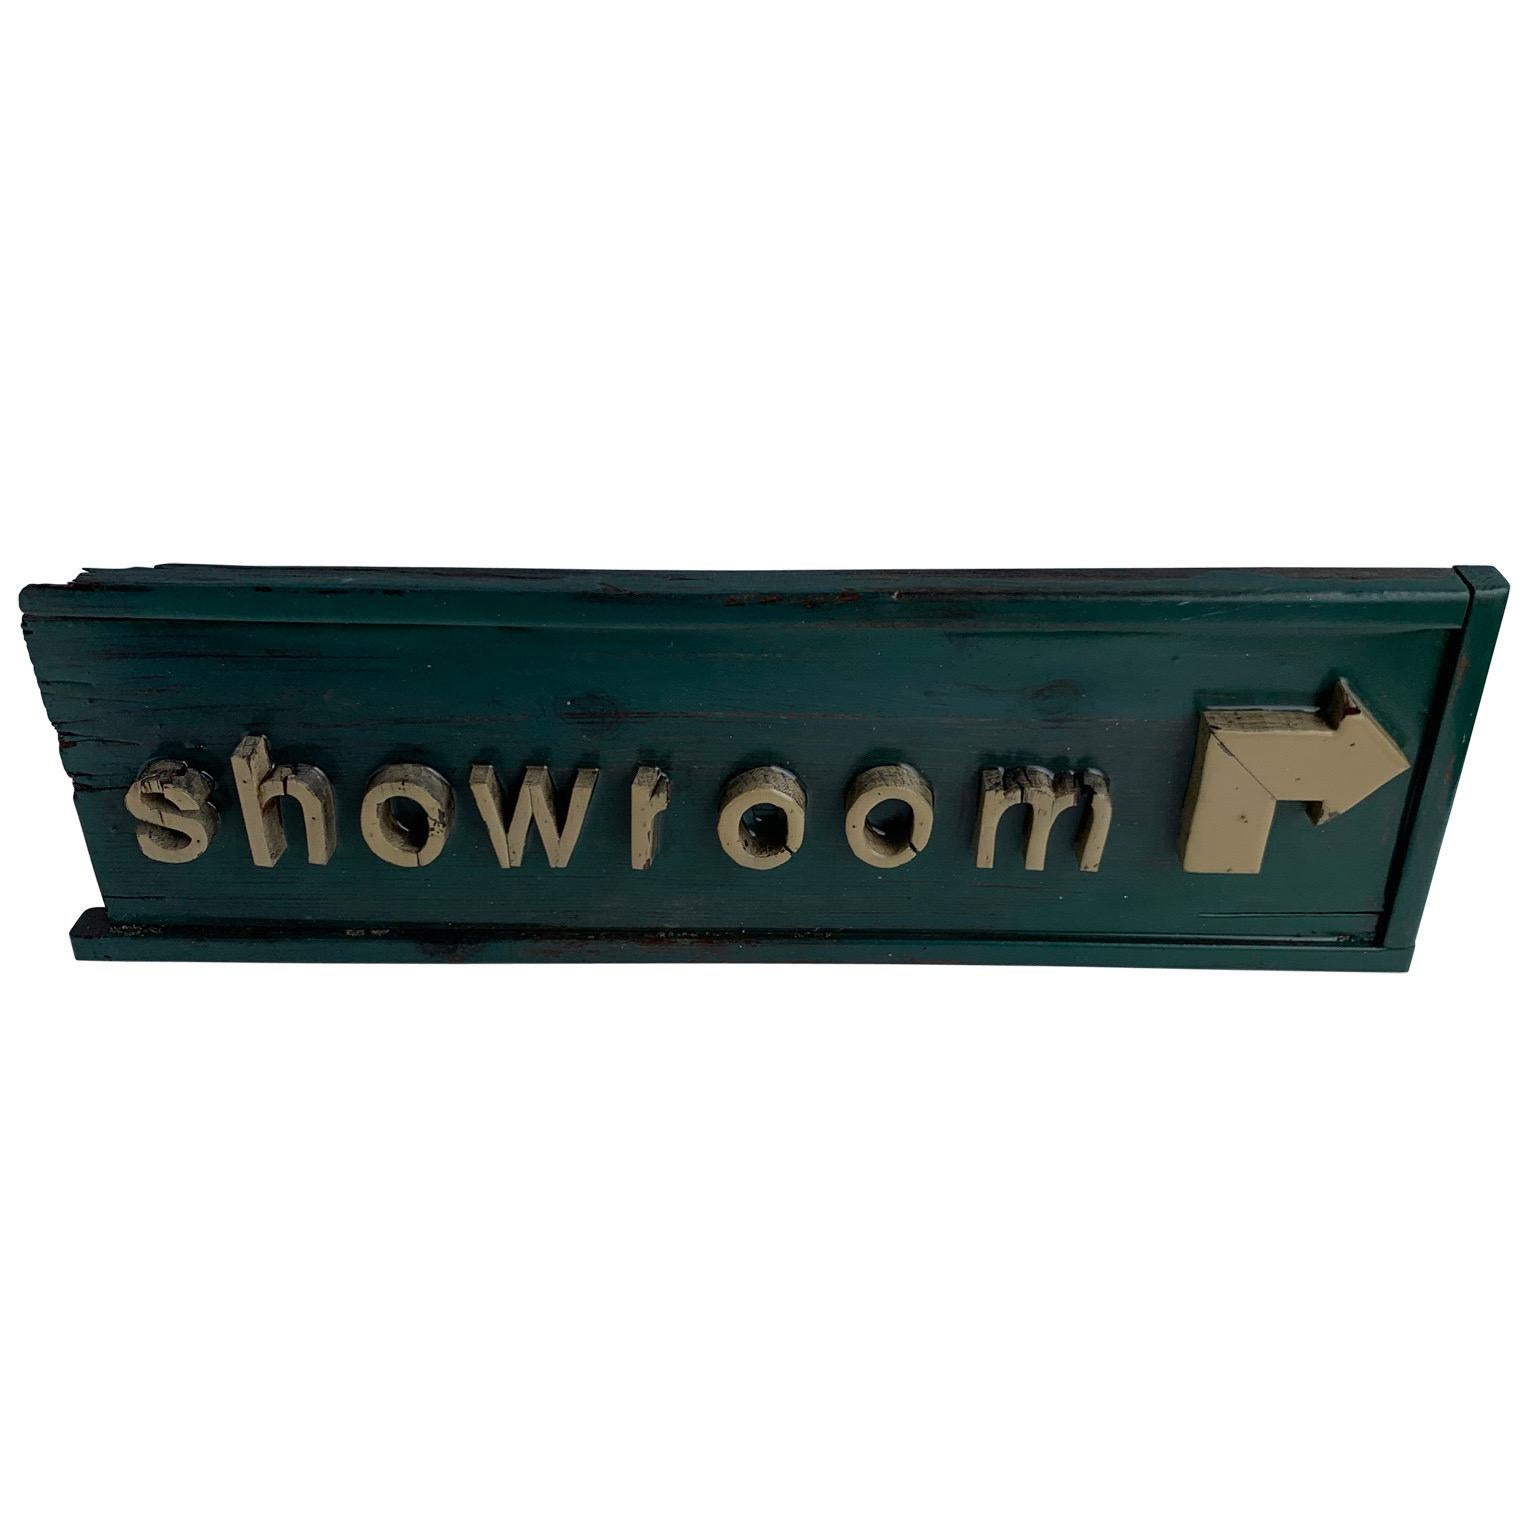 American Folk Art trade sign with hand-carved 